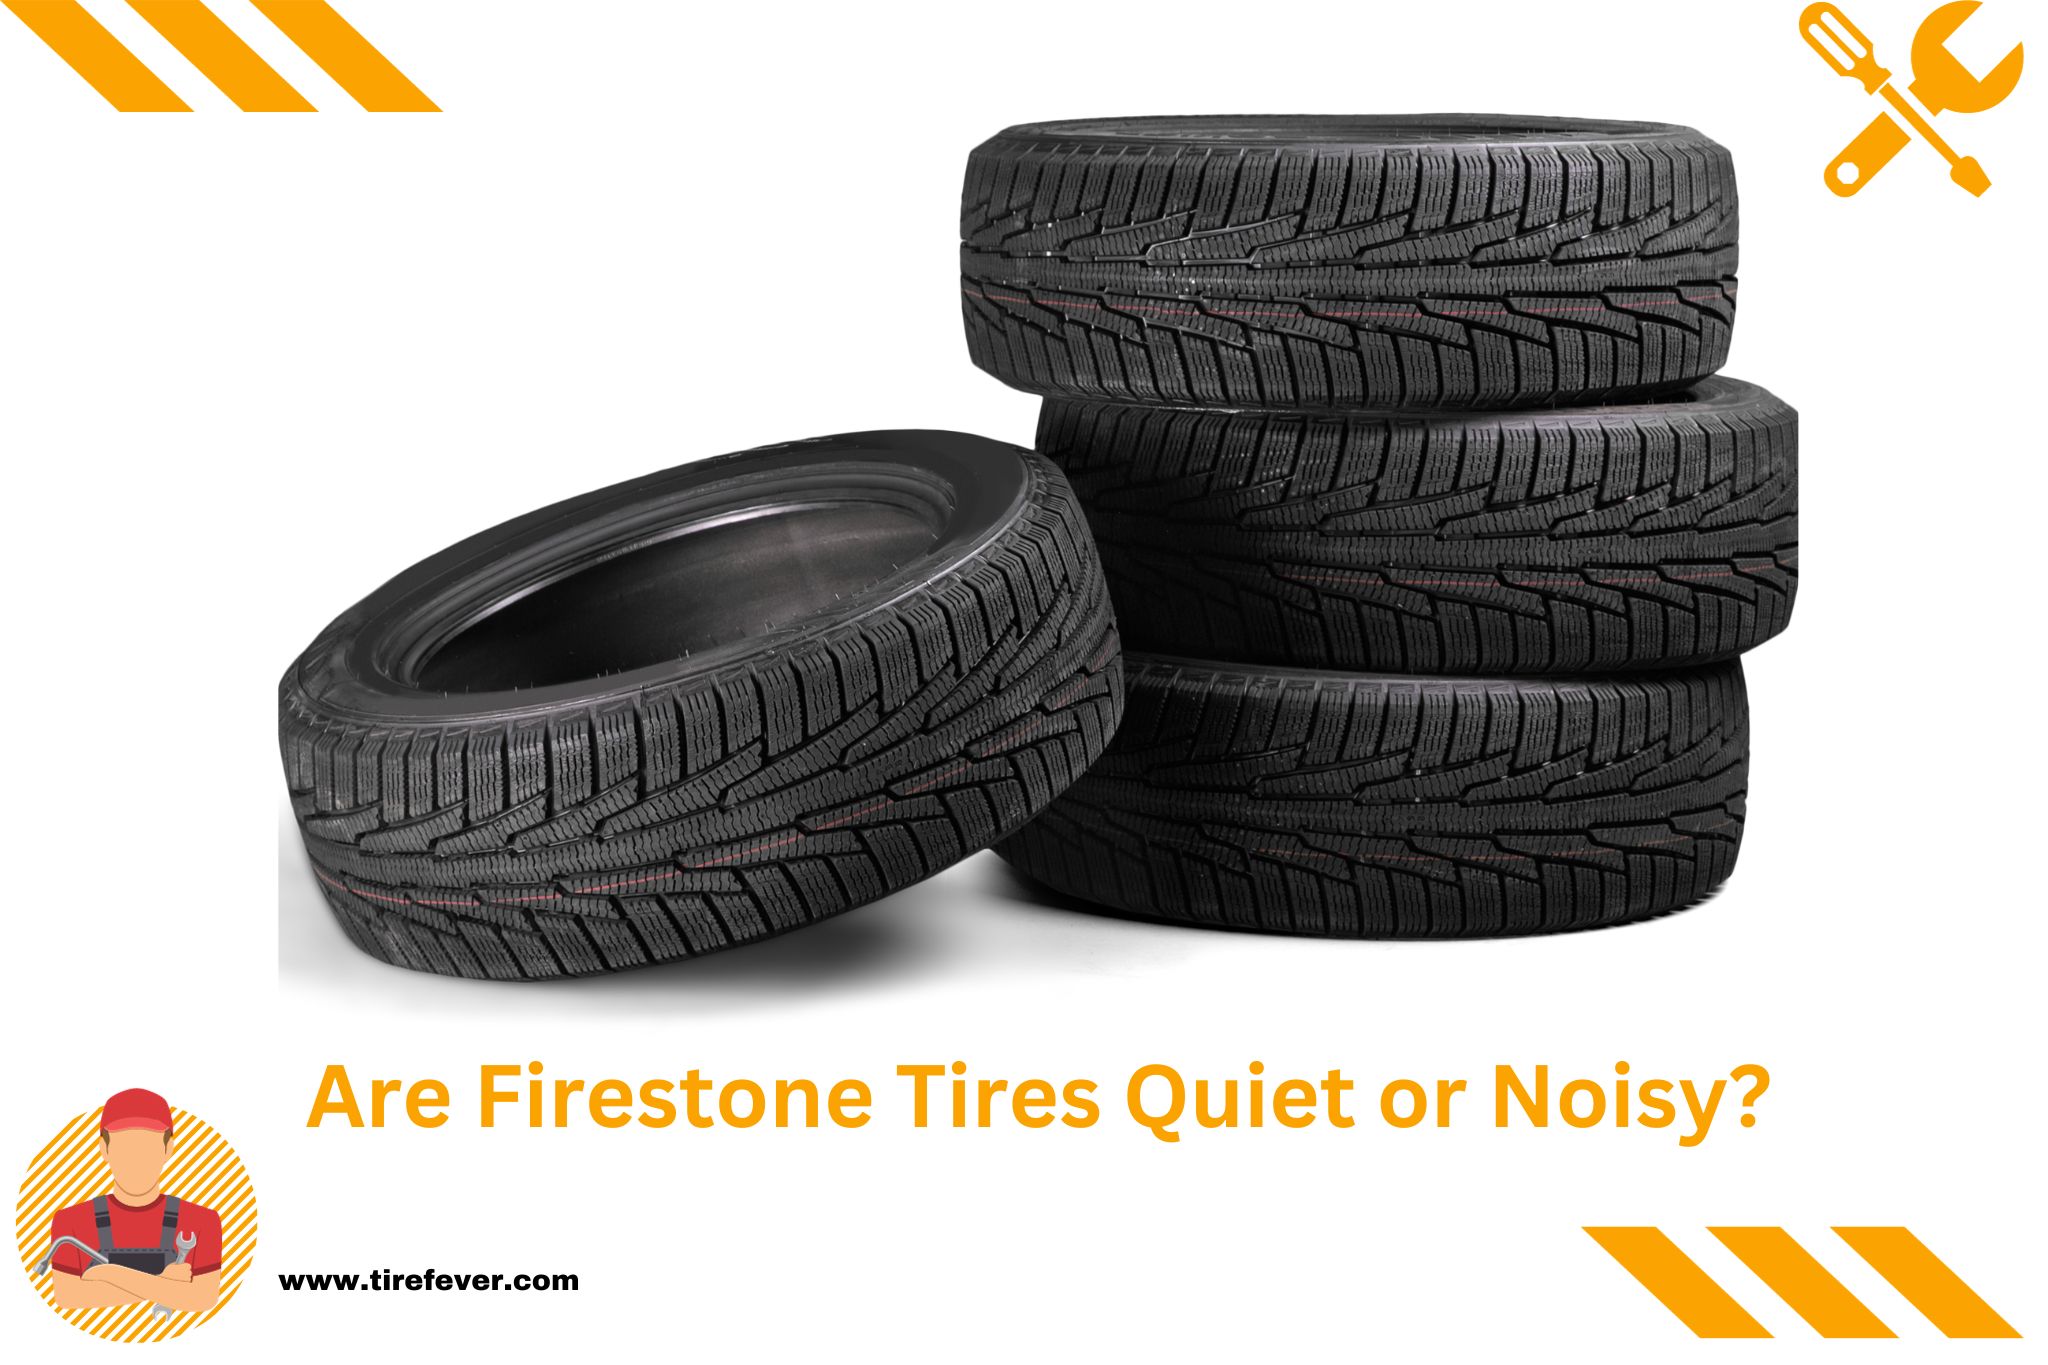 Are Firestone Tires Quiet or Noisy?